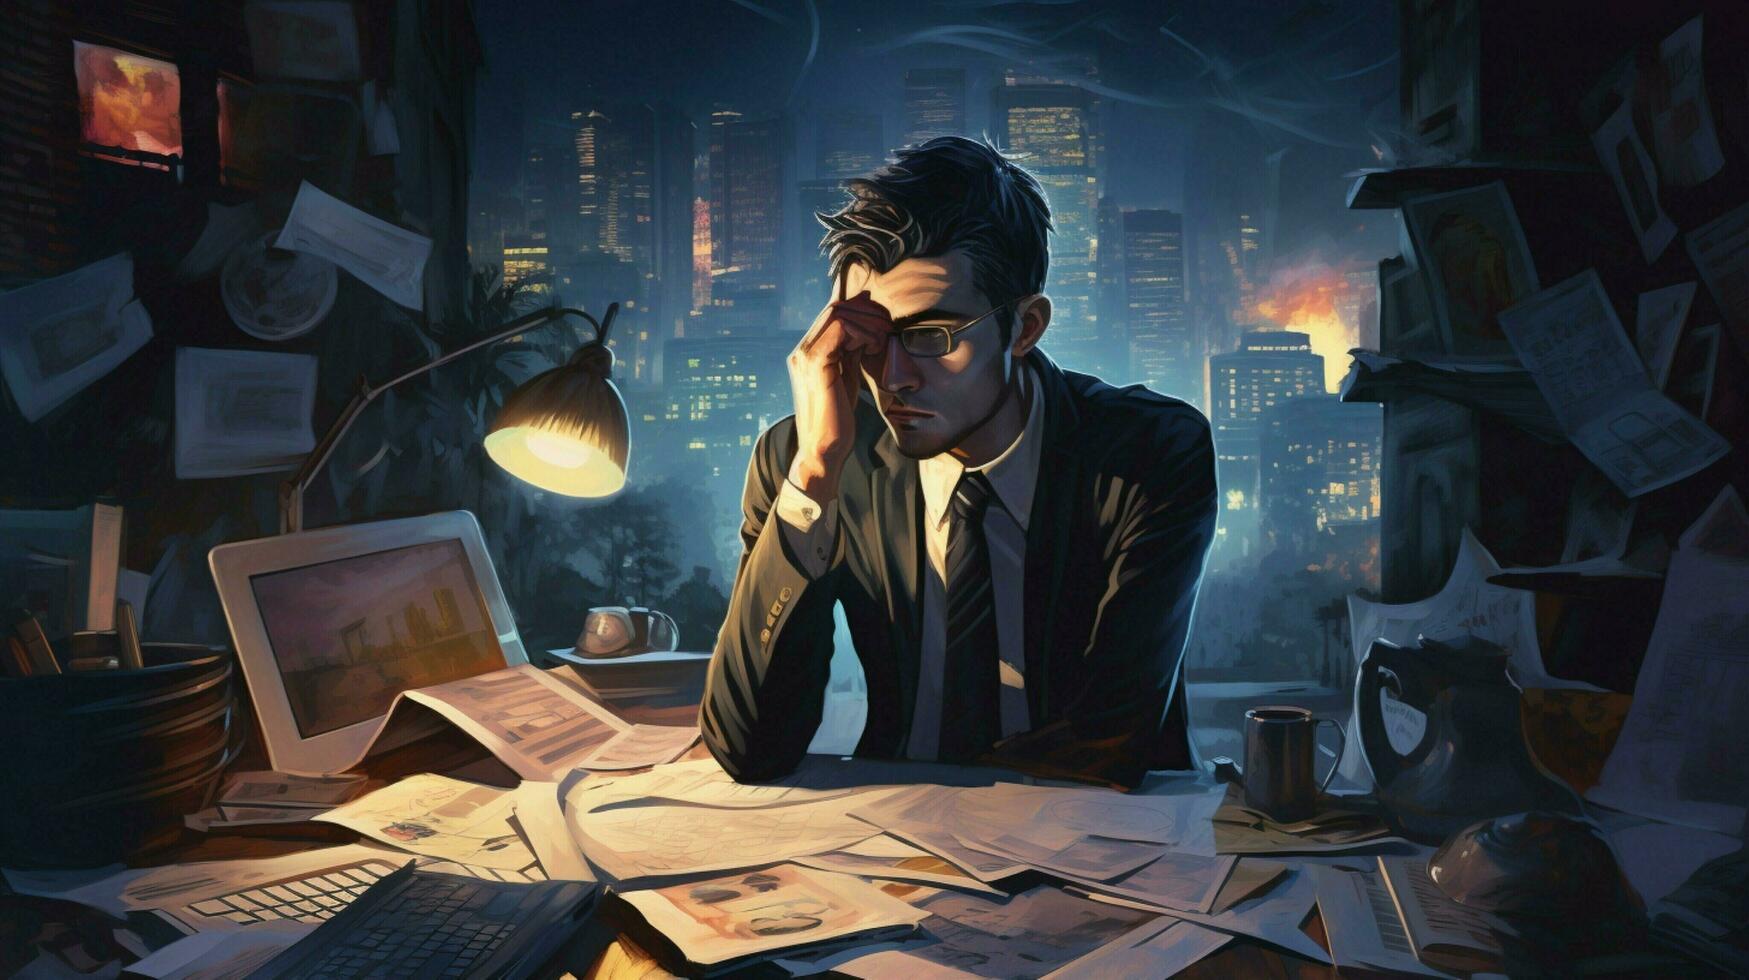 overworked businessman brainstorming sticky ideas at night photo